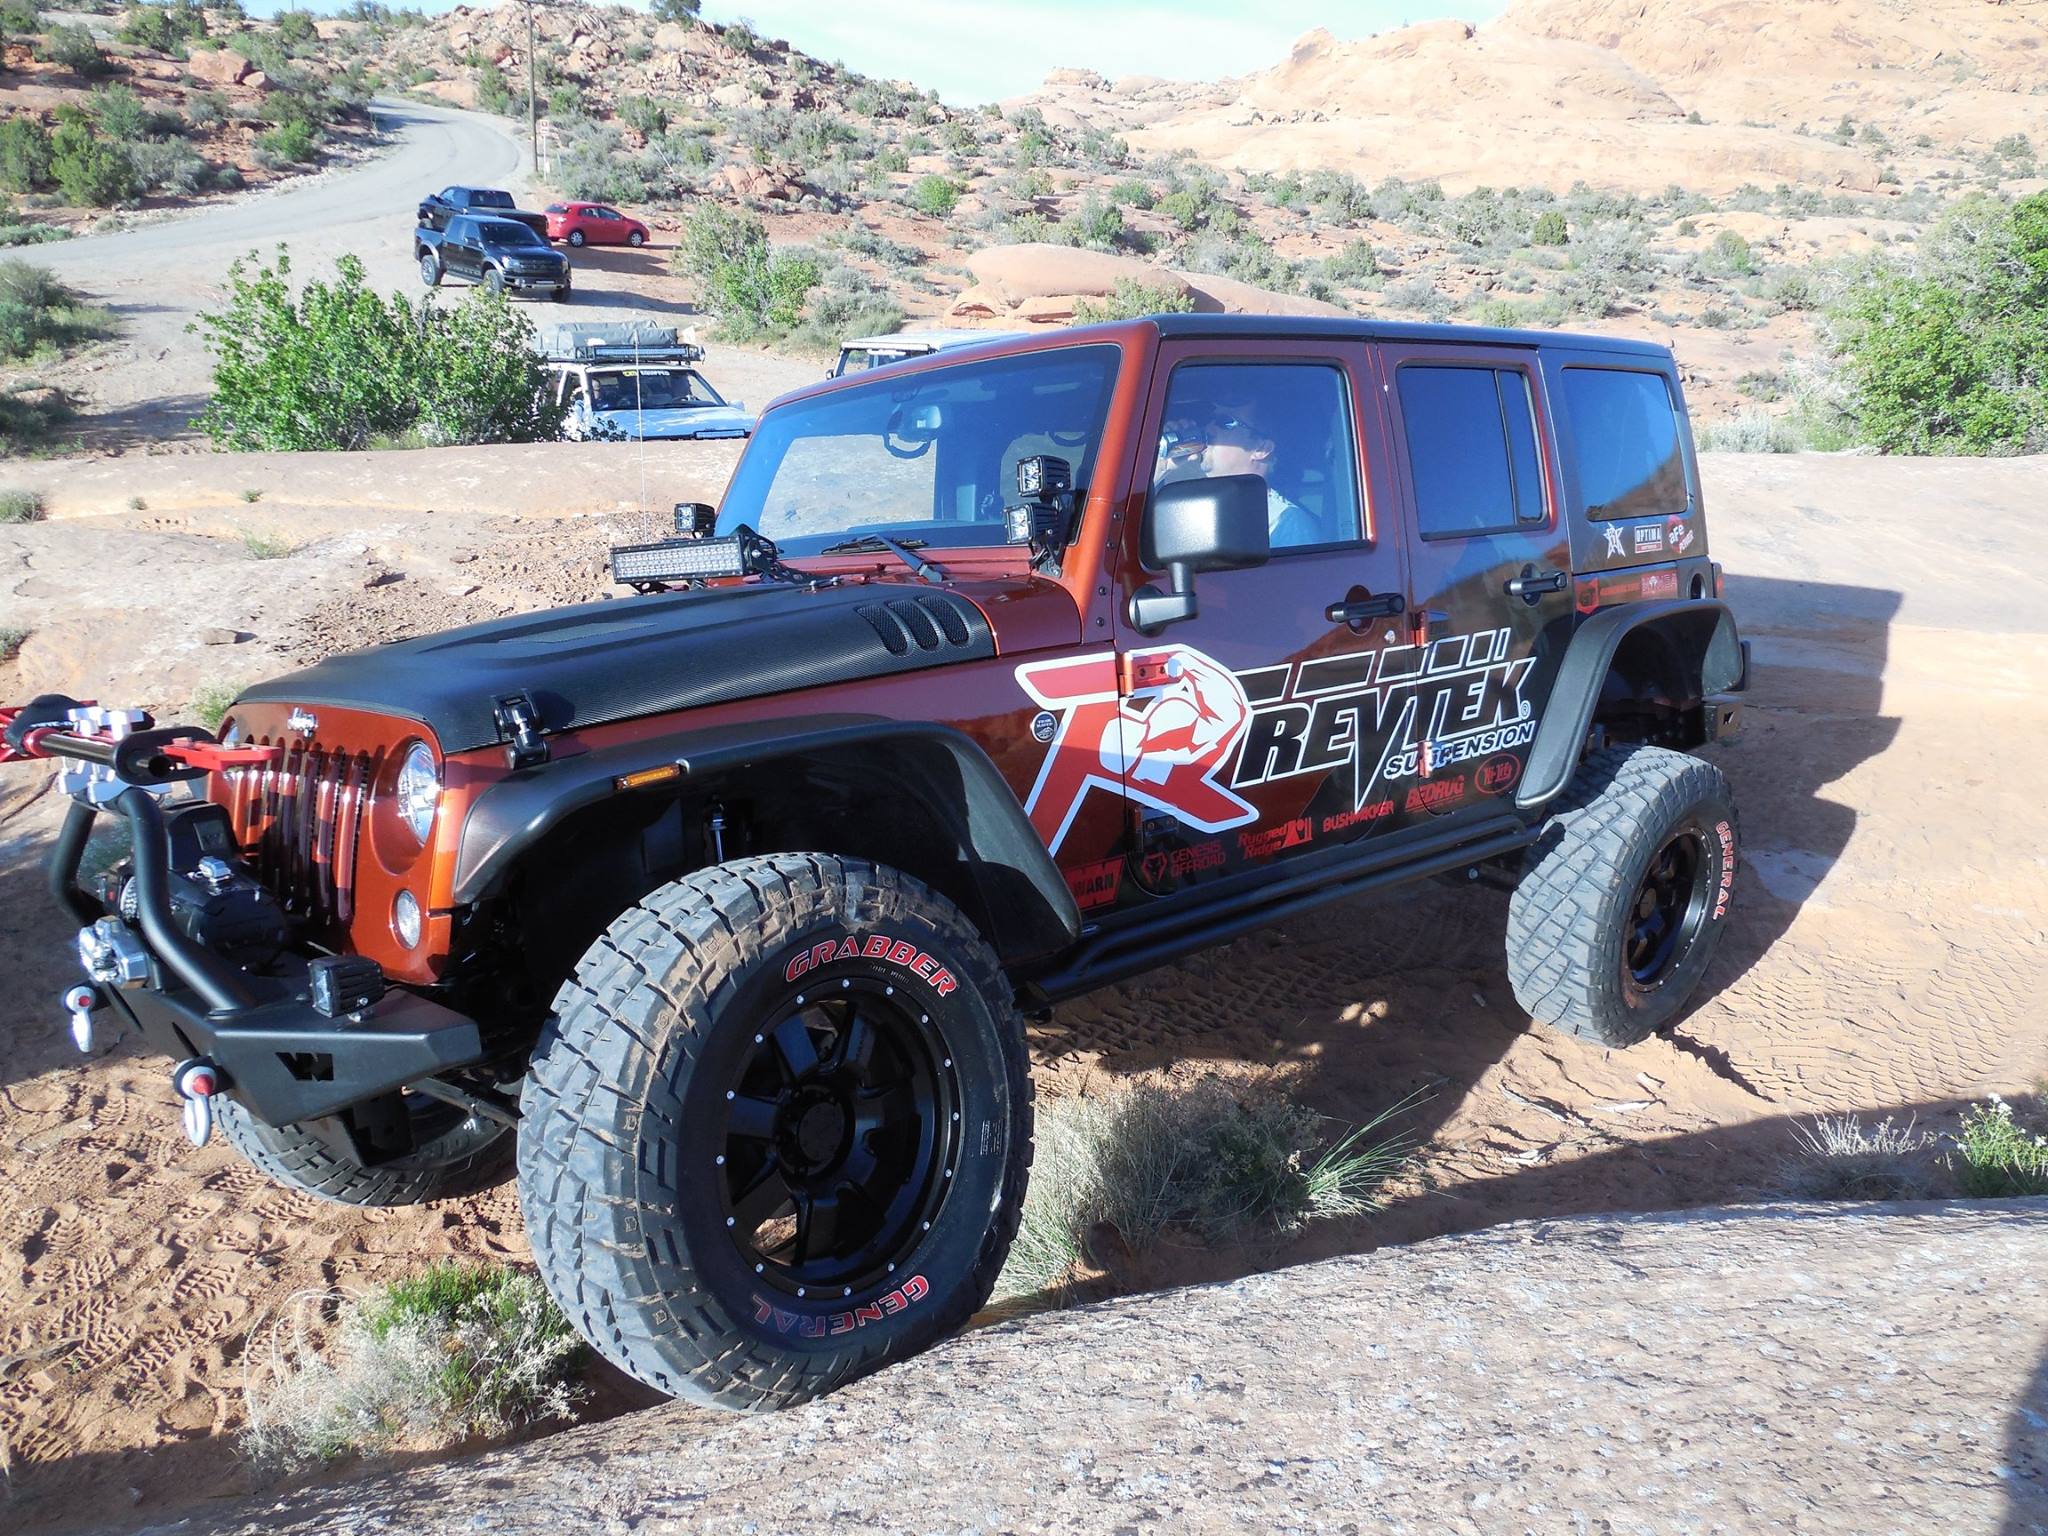 Revtek's lift kits are complete packages